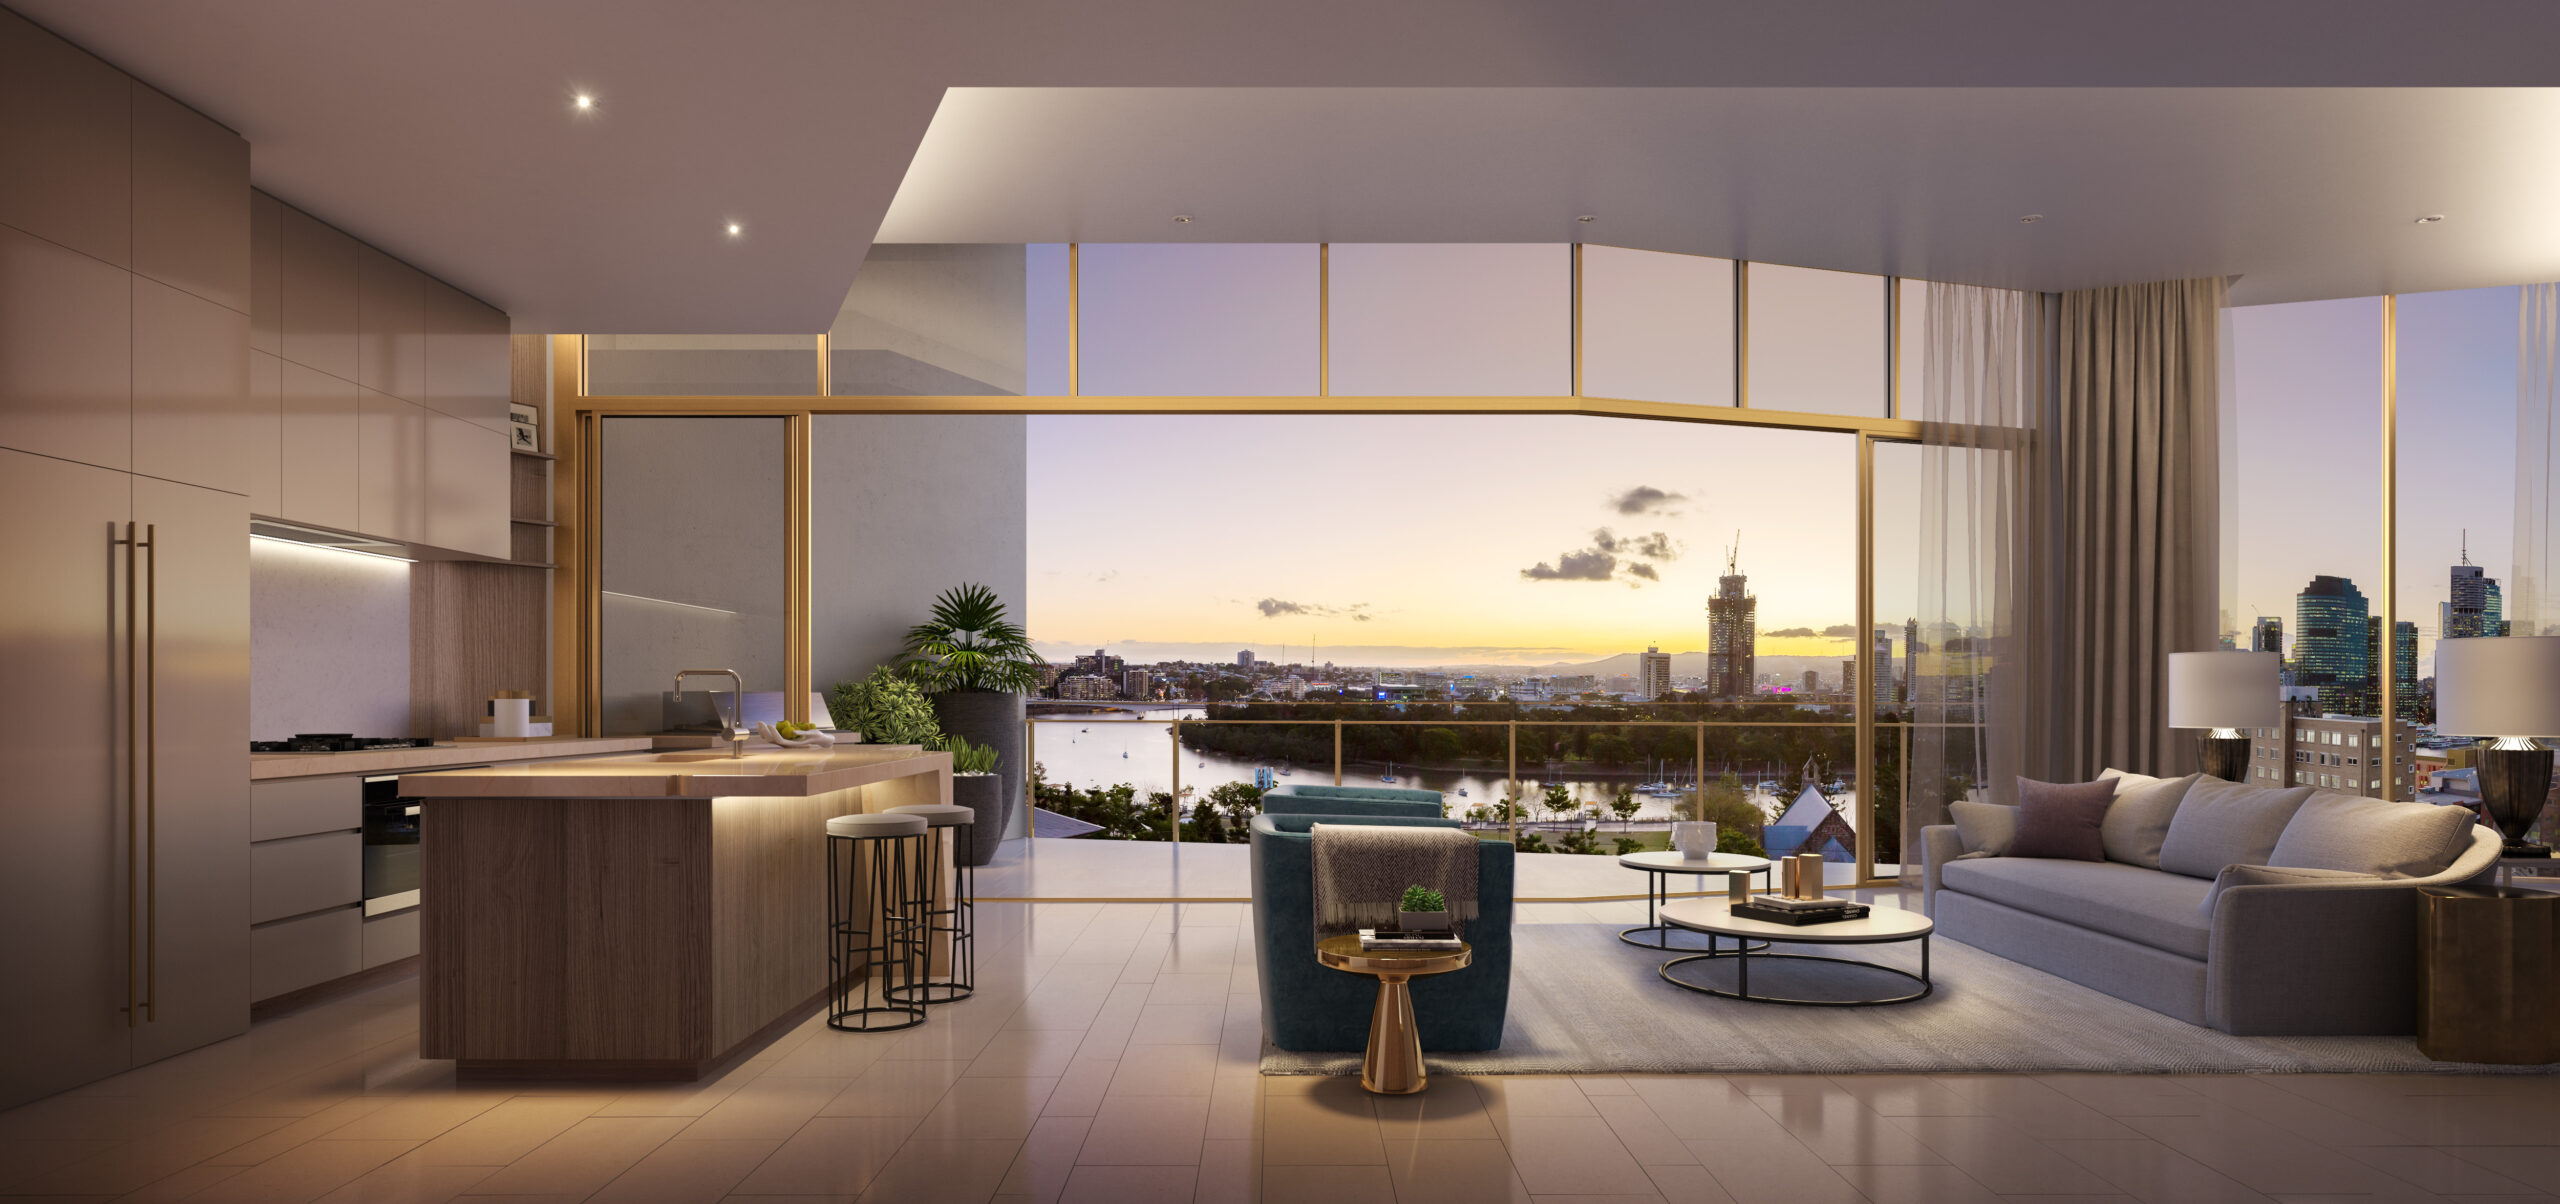 Luxurious interior of a penthouse in a high-class residential building, featuring a premium tile floor and gold-finished mullions on the facade. The interior space is adorned with high-end furniture, showcasing the kitchen and lounge area. A large balcony offers a breathtaking view of the Brisbane skyline.